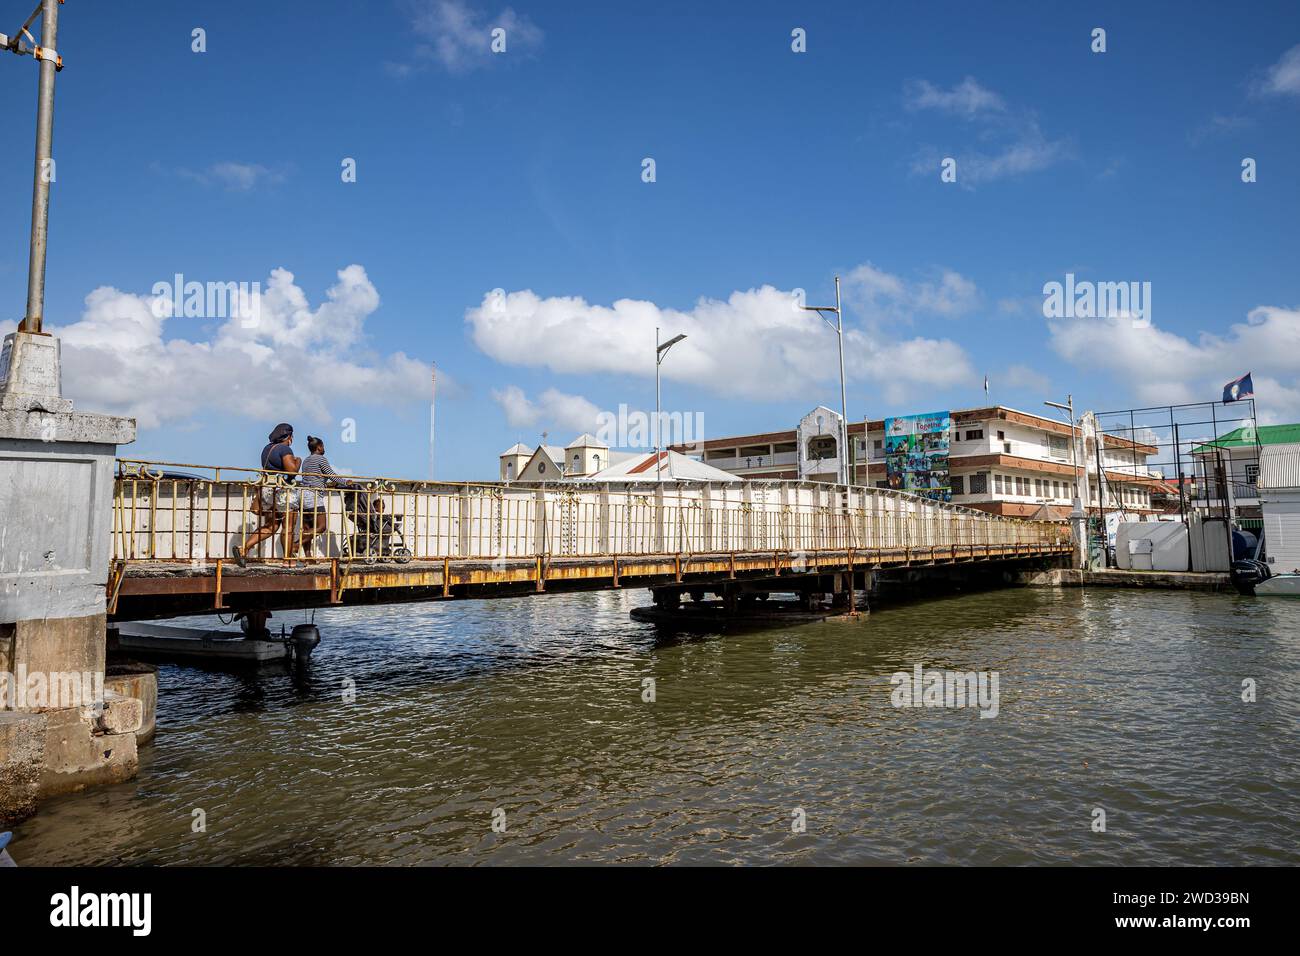 Belize, Belize City, The Swing Bridge over Collet Canal Stock Photo